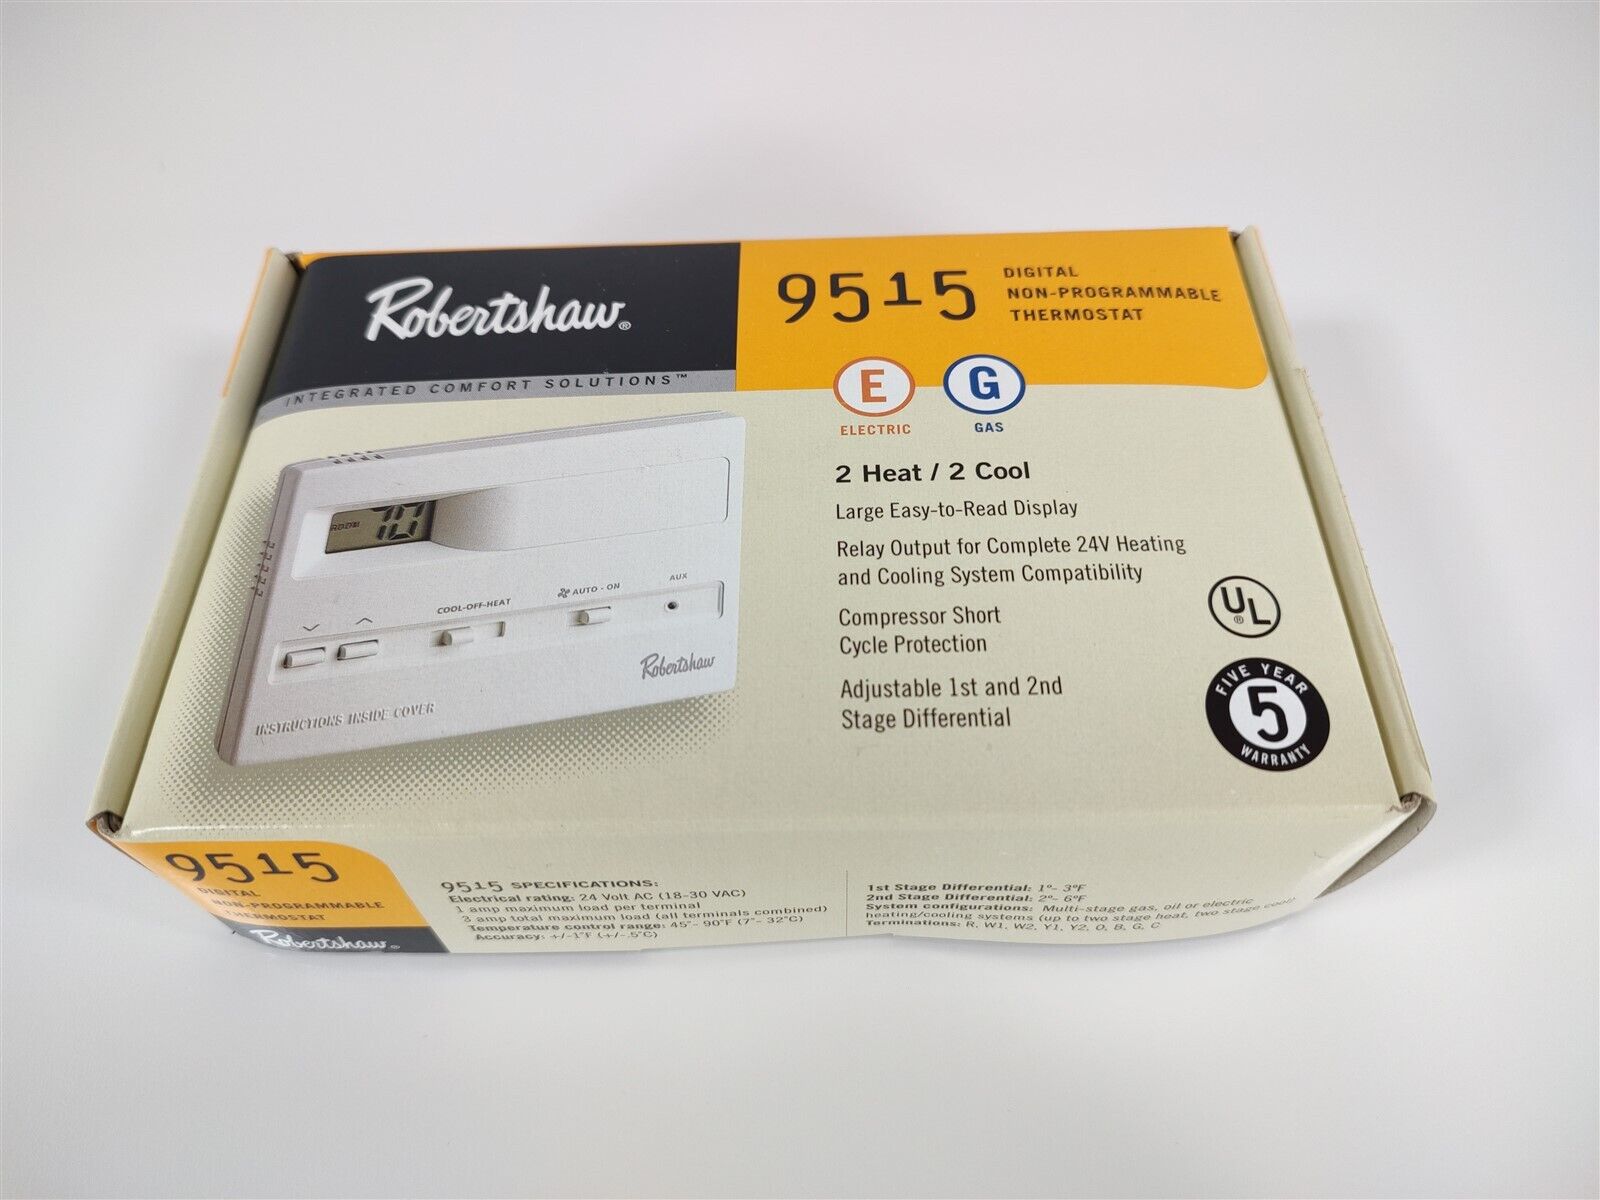 Robertshaw 9515 Non-Programmable Thermostat